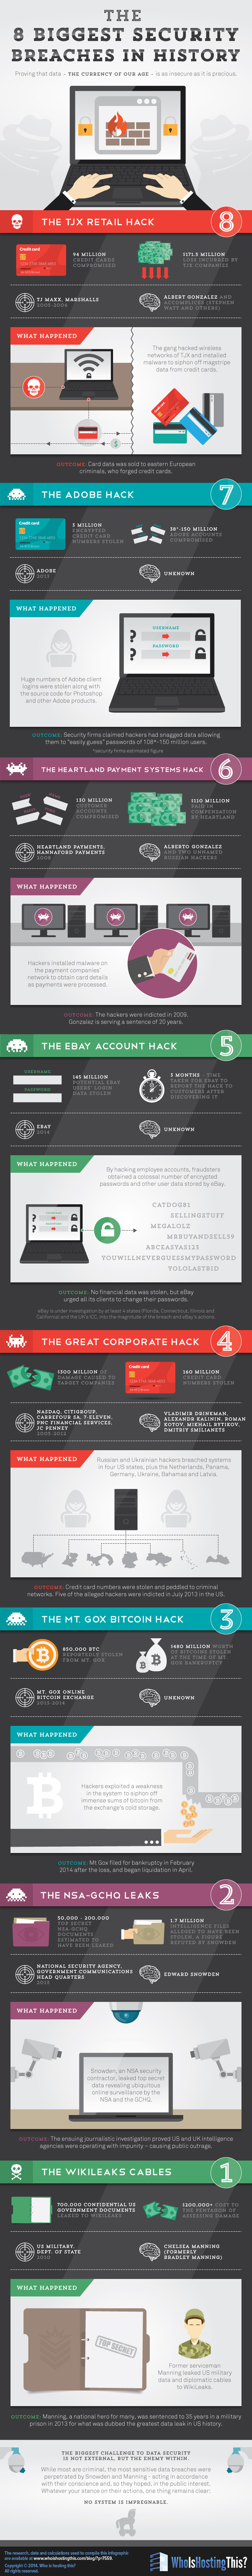 The 8 Biggest Data Breaches in History (infographic by WhoIsHostingThis.com)